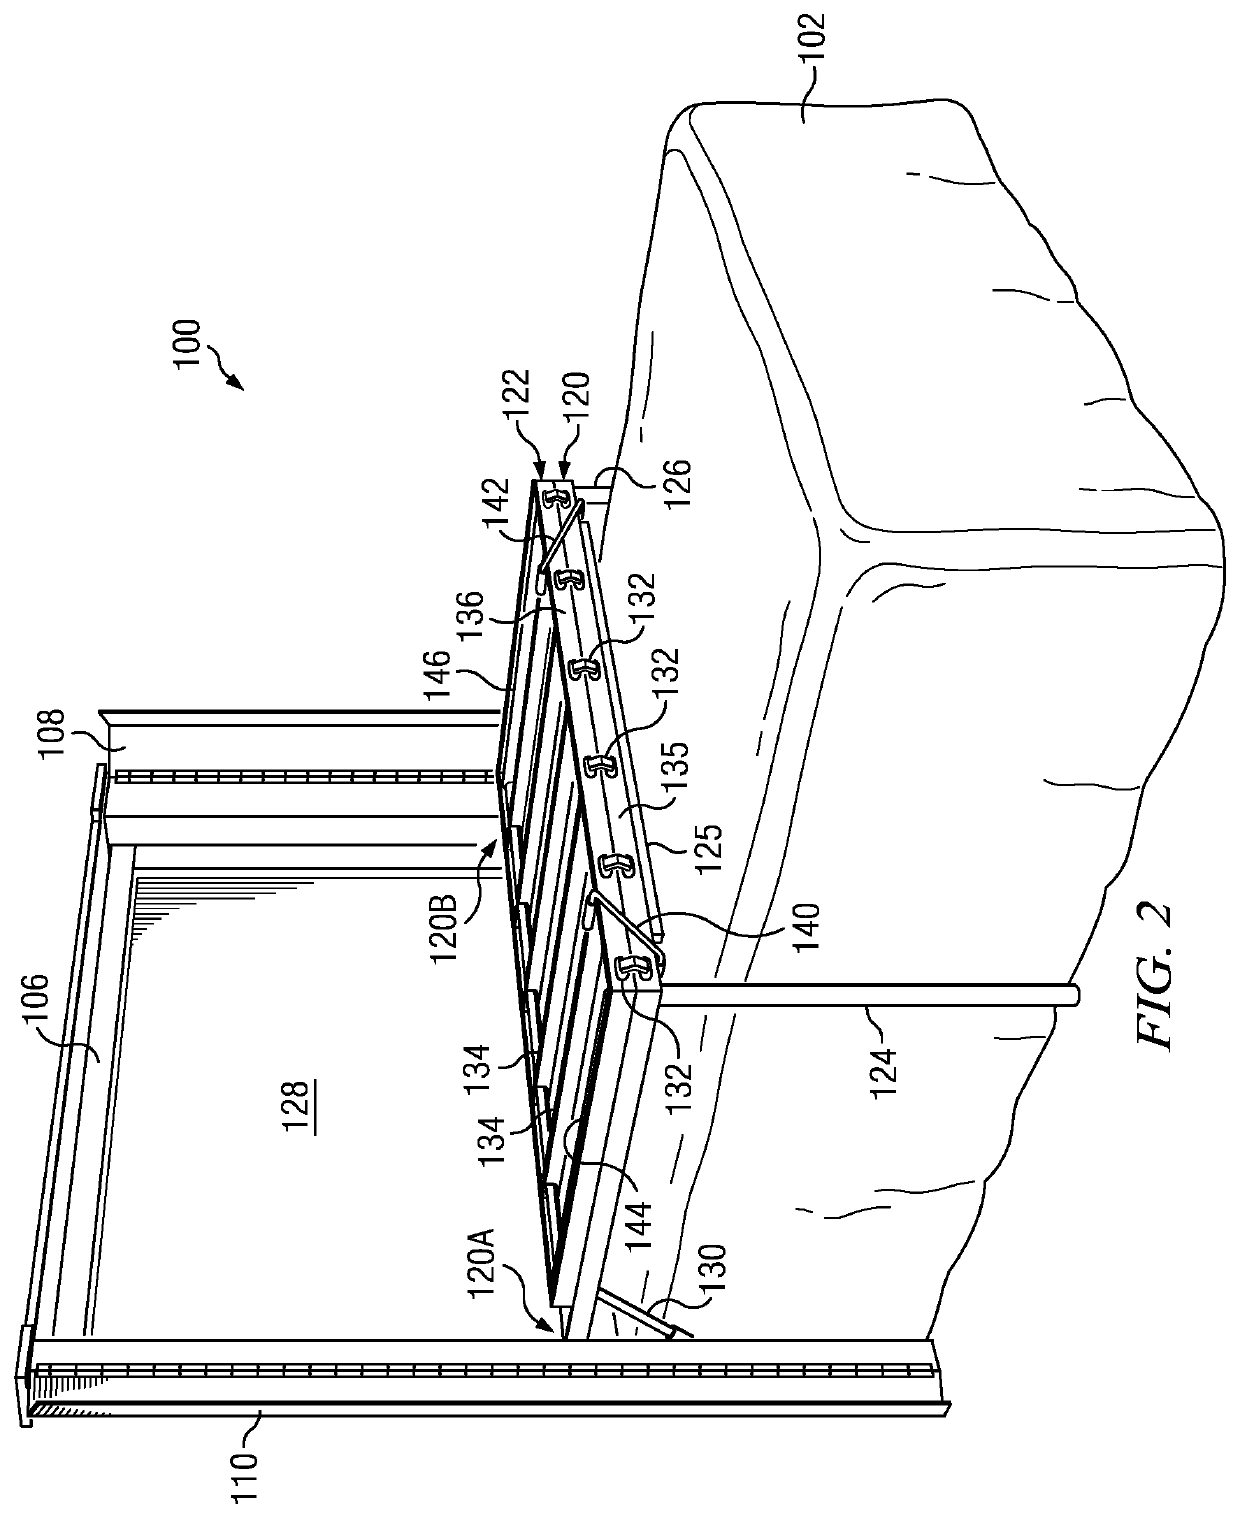 Convertible headboard table apparatus and method of use